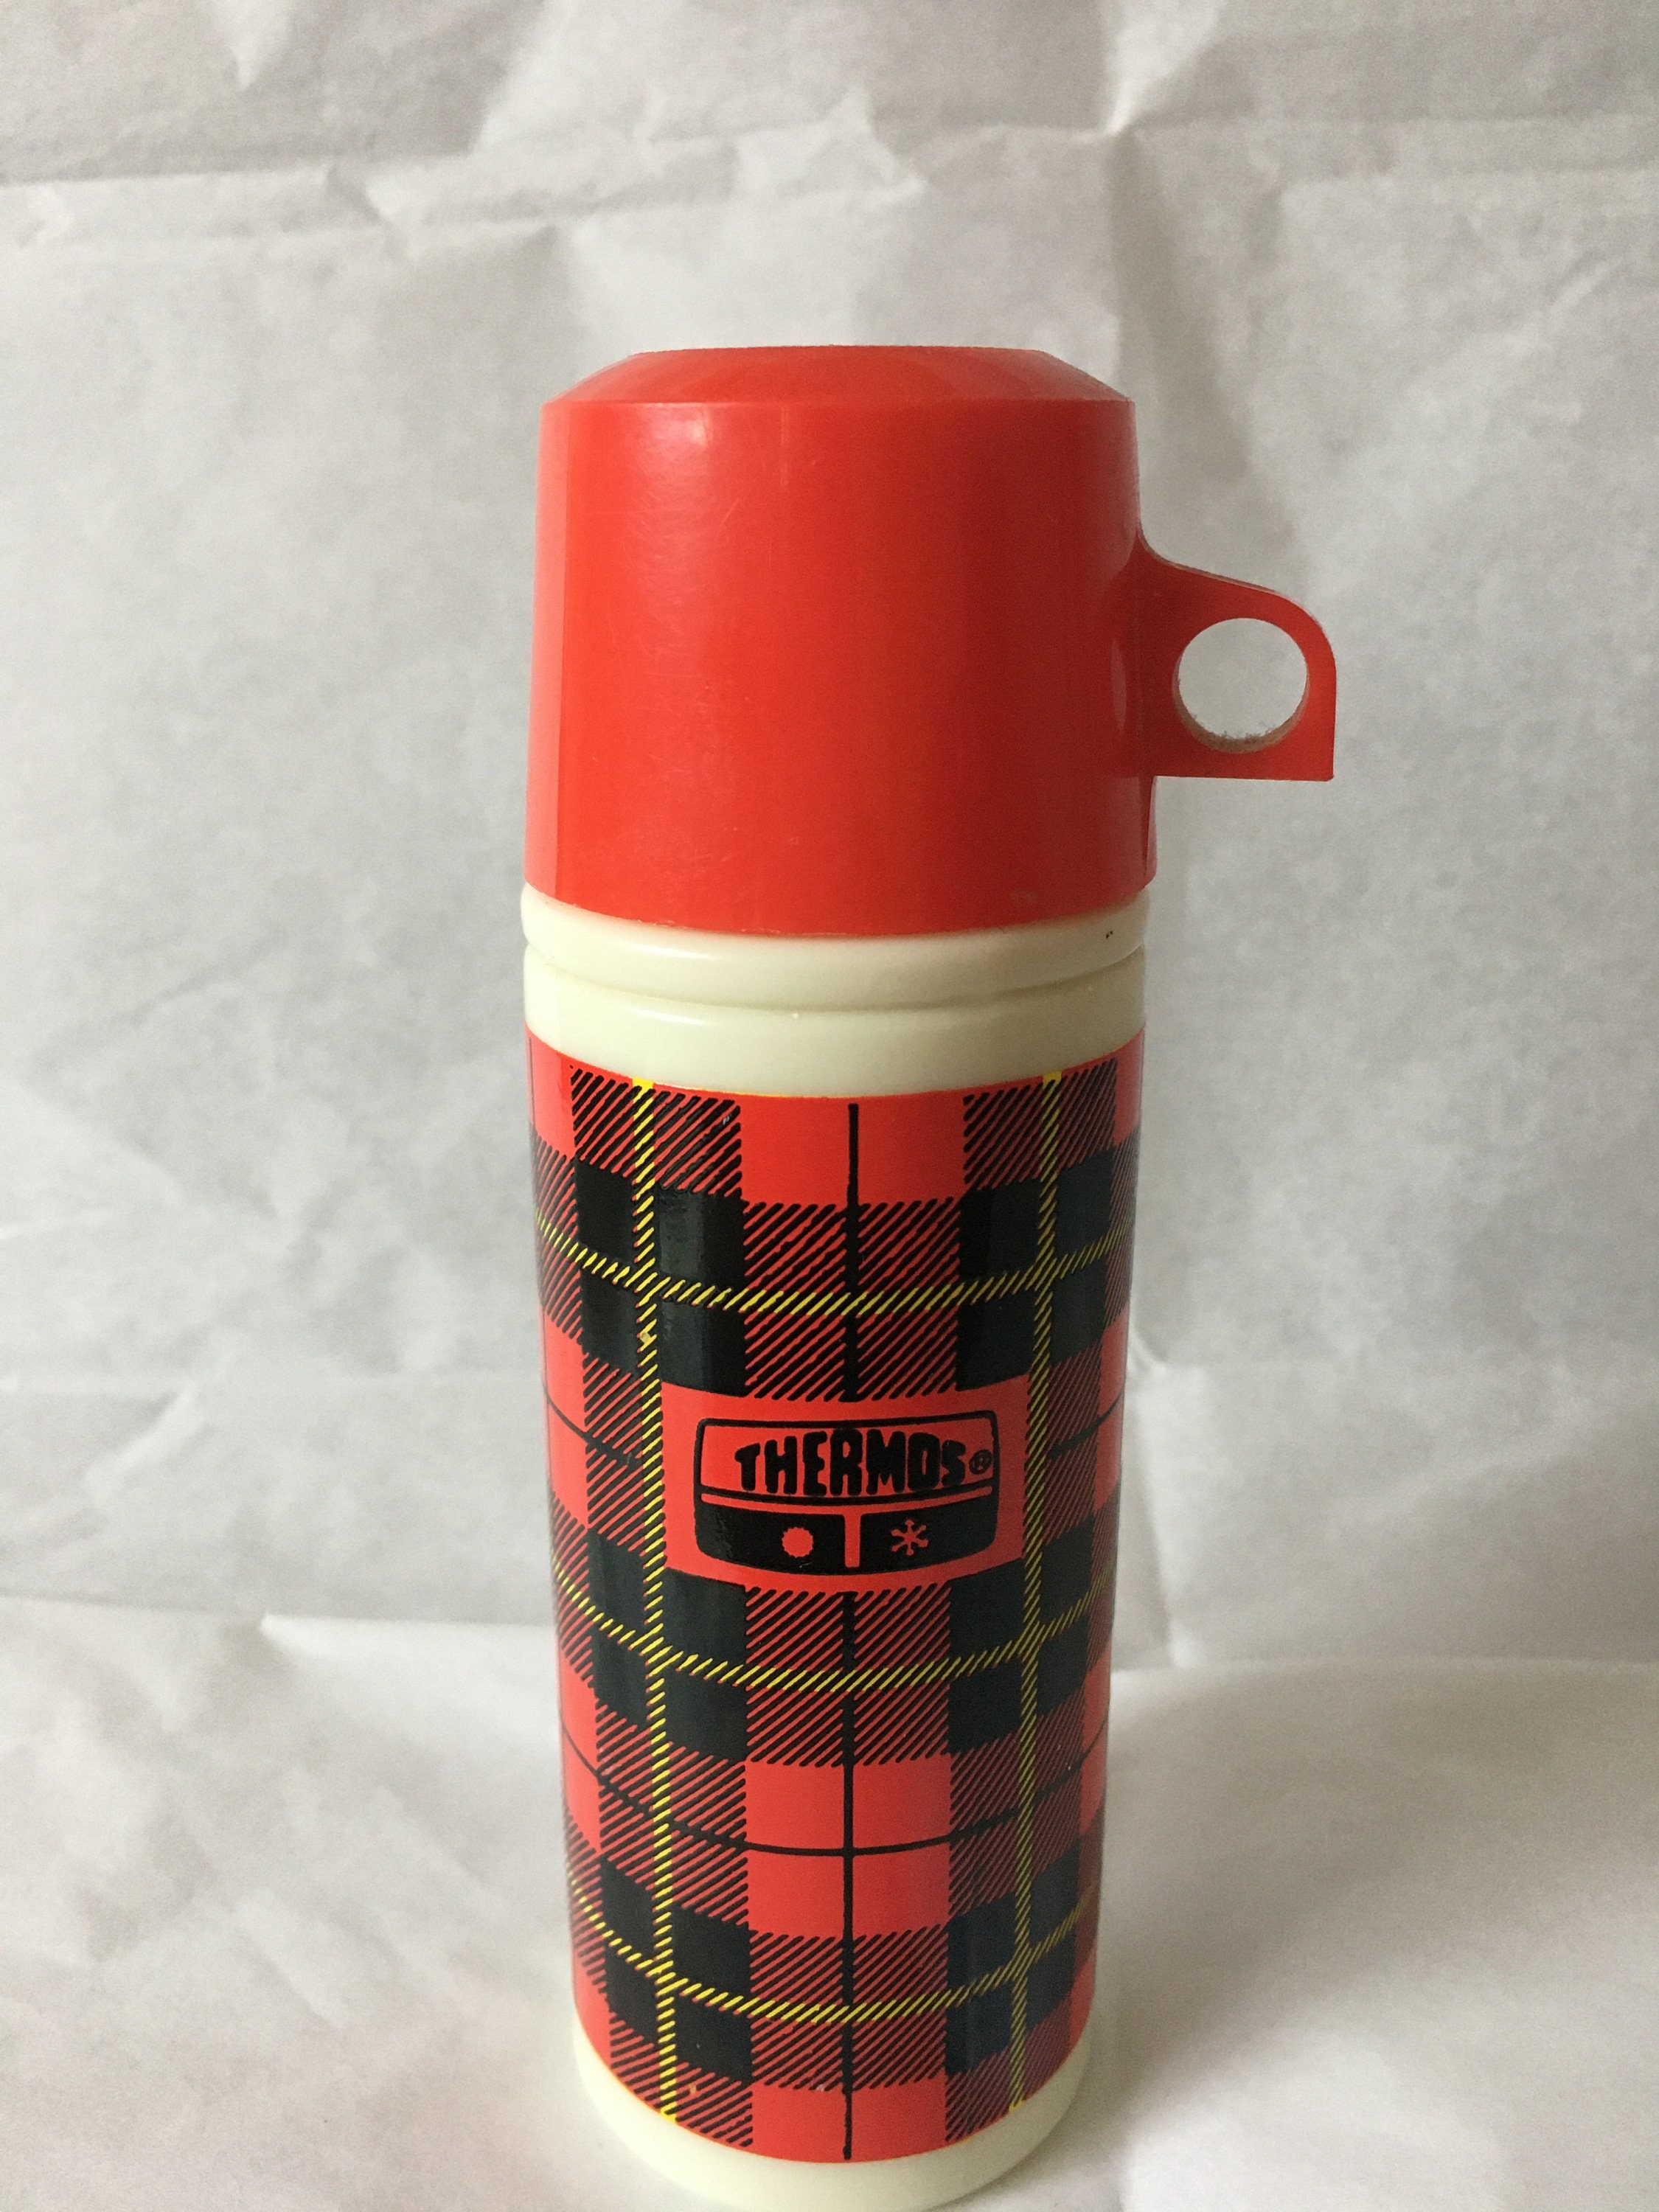 Avon Plaid Cologne Bottle Decanter Stamped Thermos Measures 5 1/4 X 2 Wide  3 0Z Cologne or Perfume 